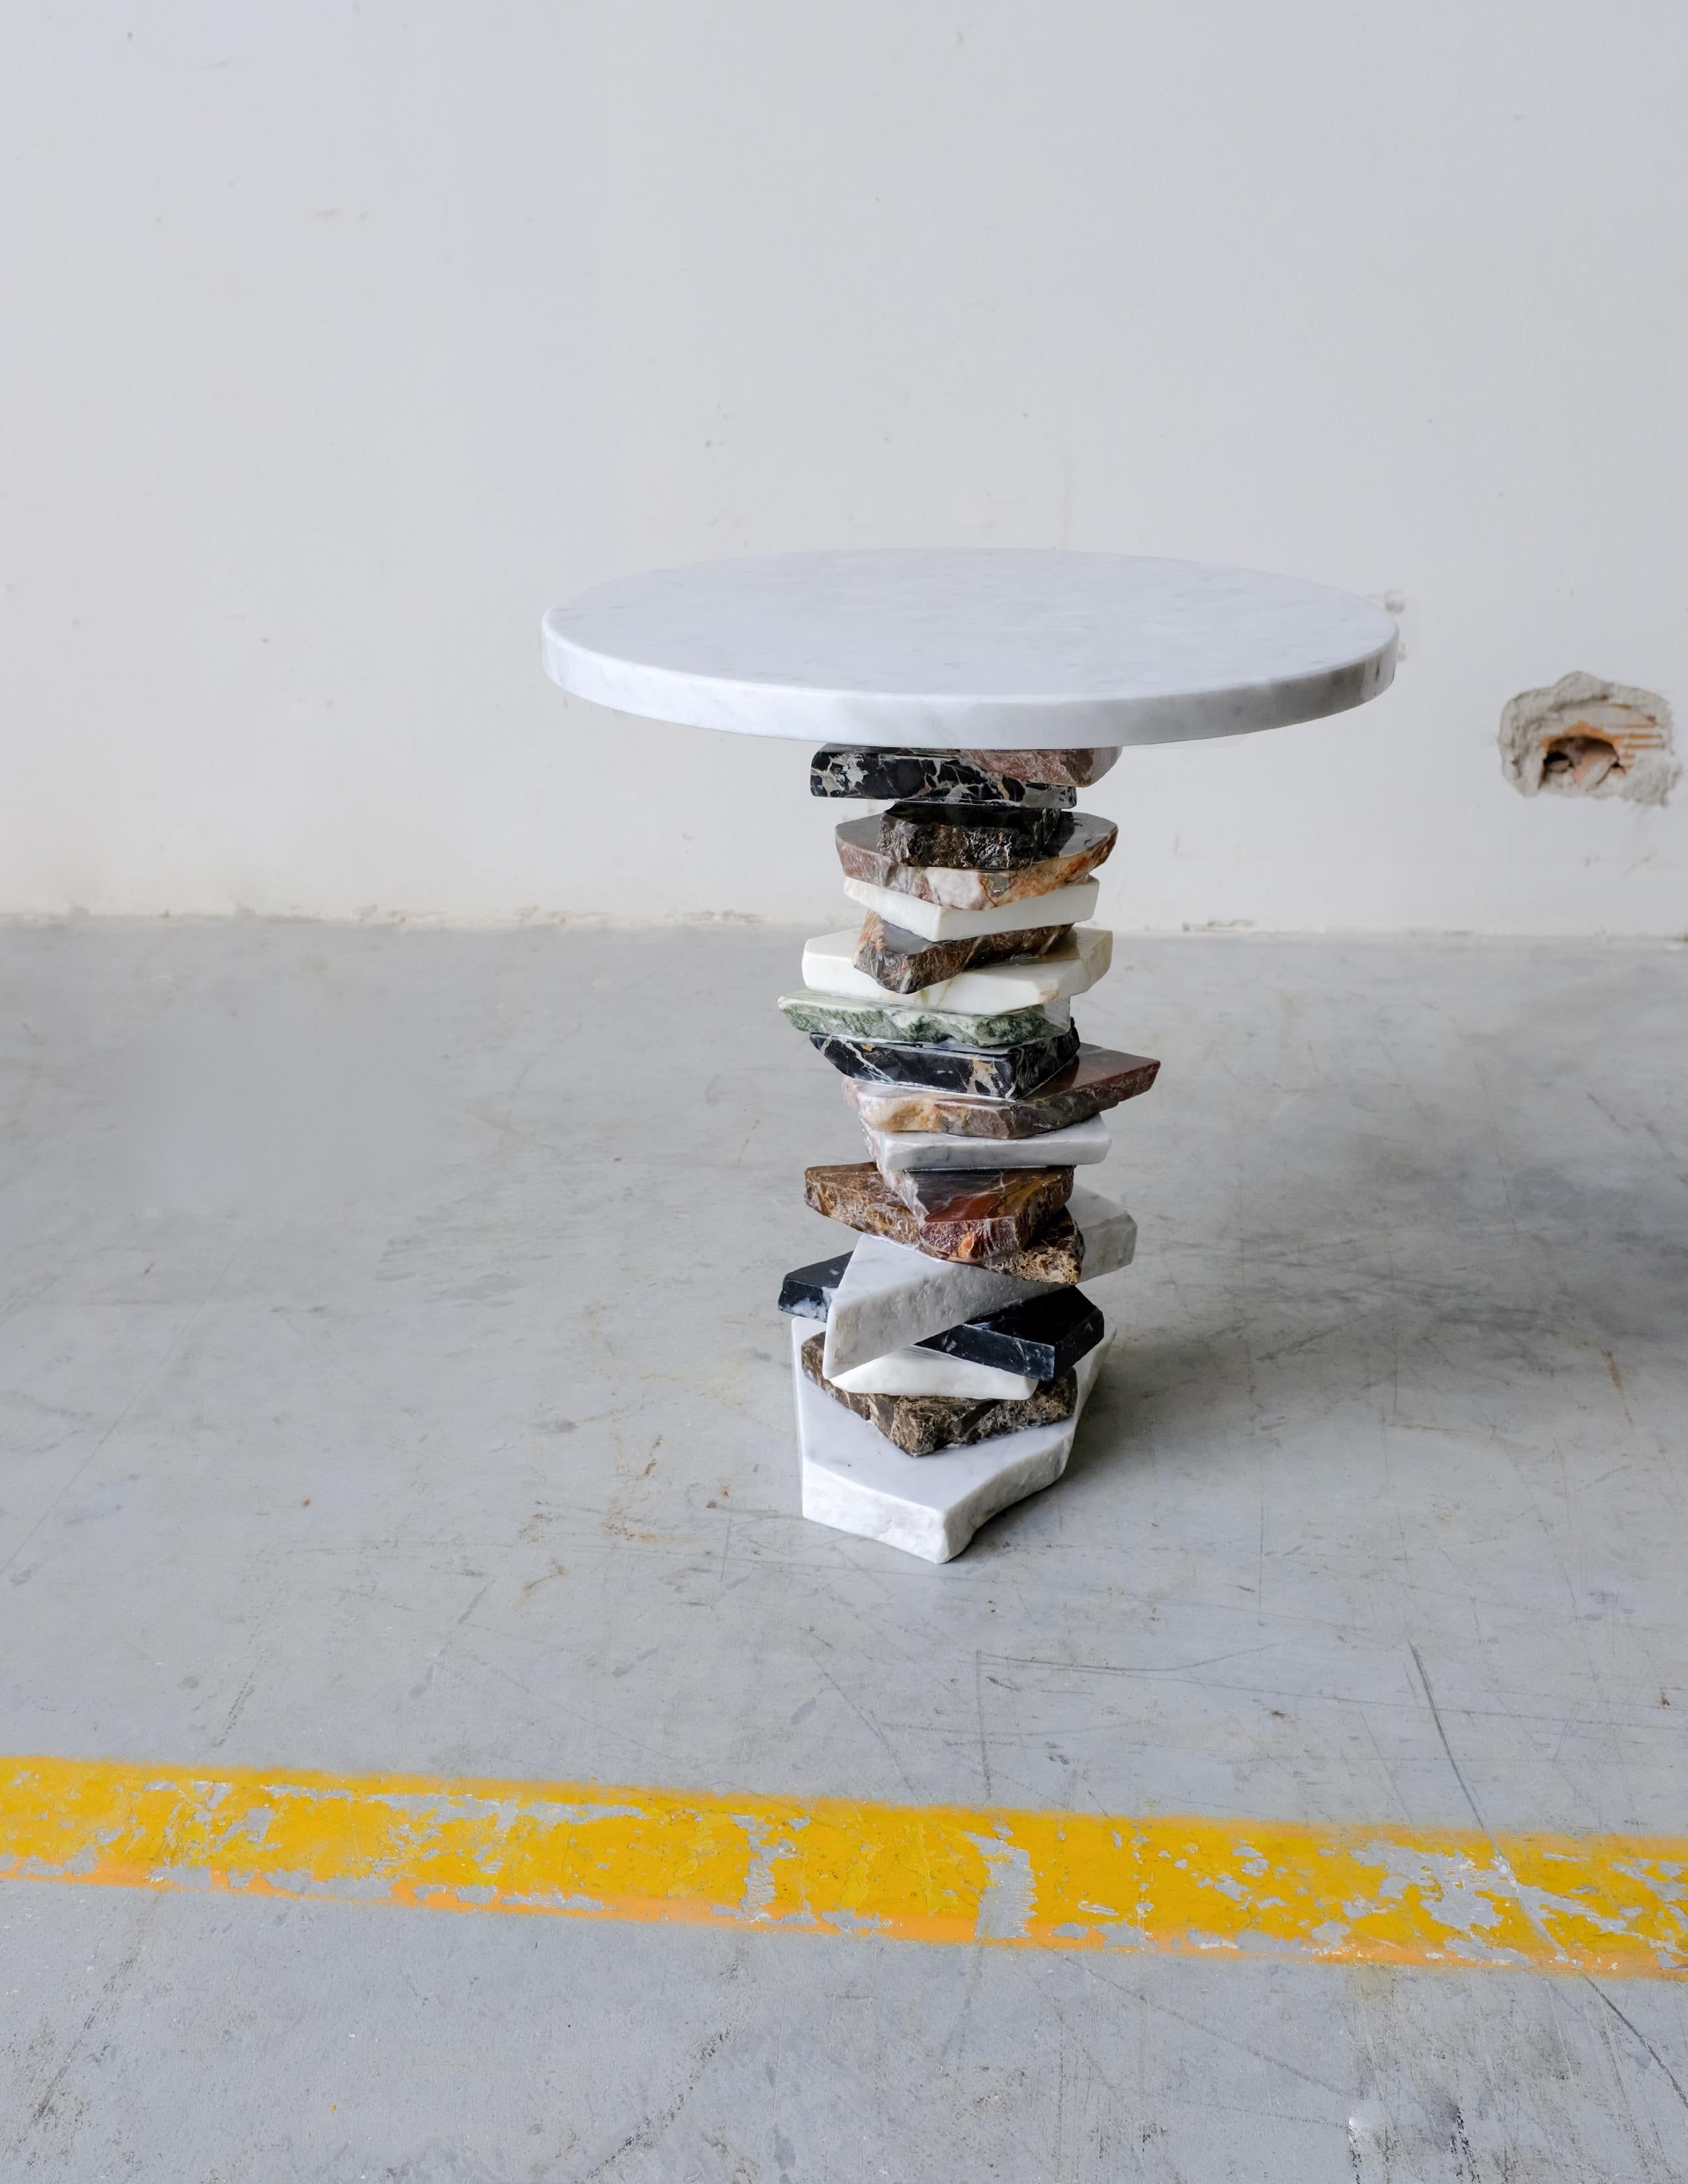 SST006 small table by Stone Stackers
Dimensions: D35.6 x H41 cm
Materials: Marbles:
Marble Top: Carrara Gioia
Marble Structure: Portoro Emperador Dark Rosso Cardinale Calacatta Oro Cipollino Verde Carrara
Weight: 16 kg

This small table